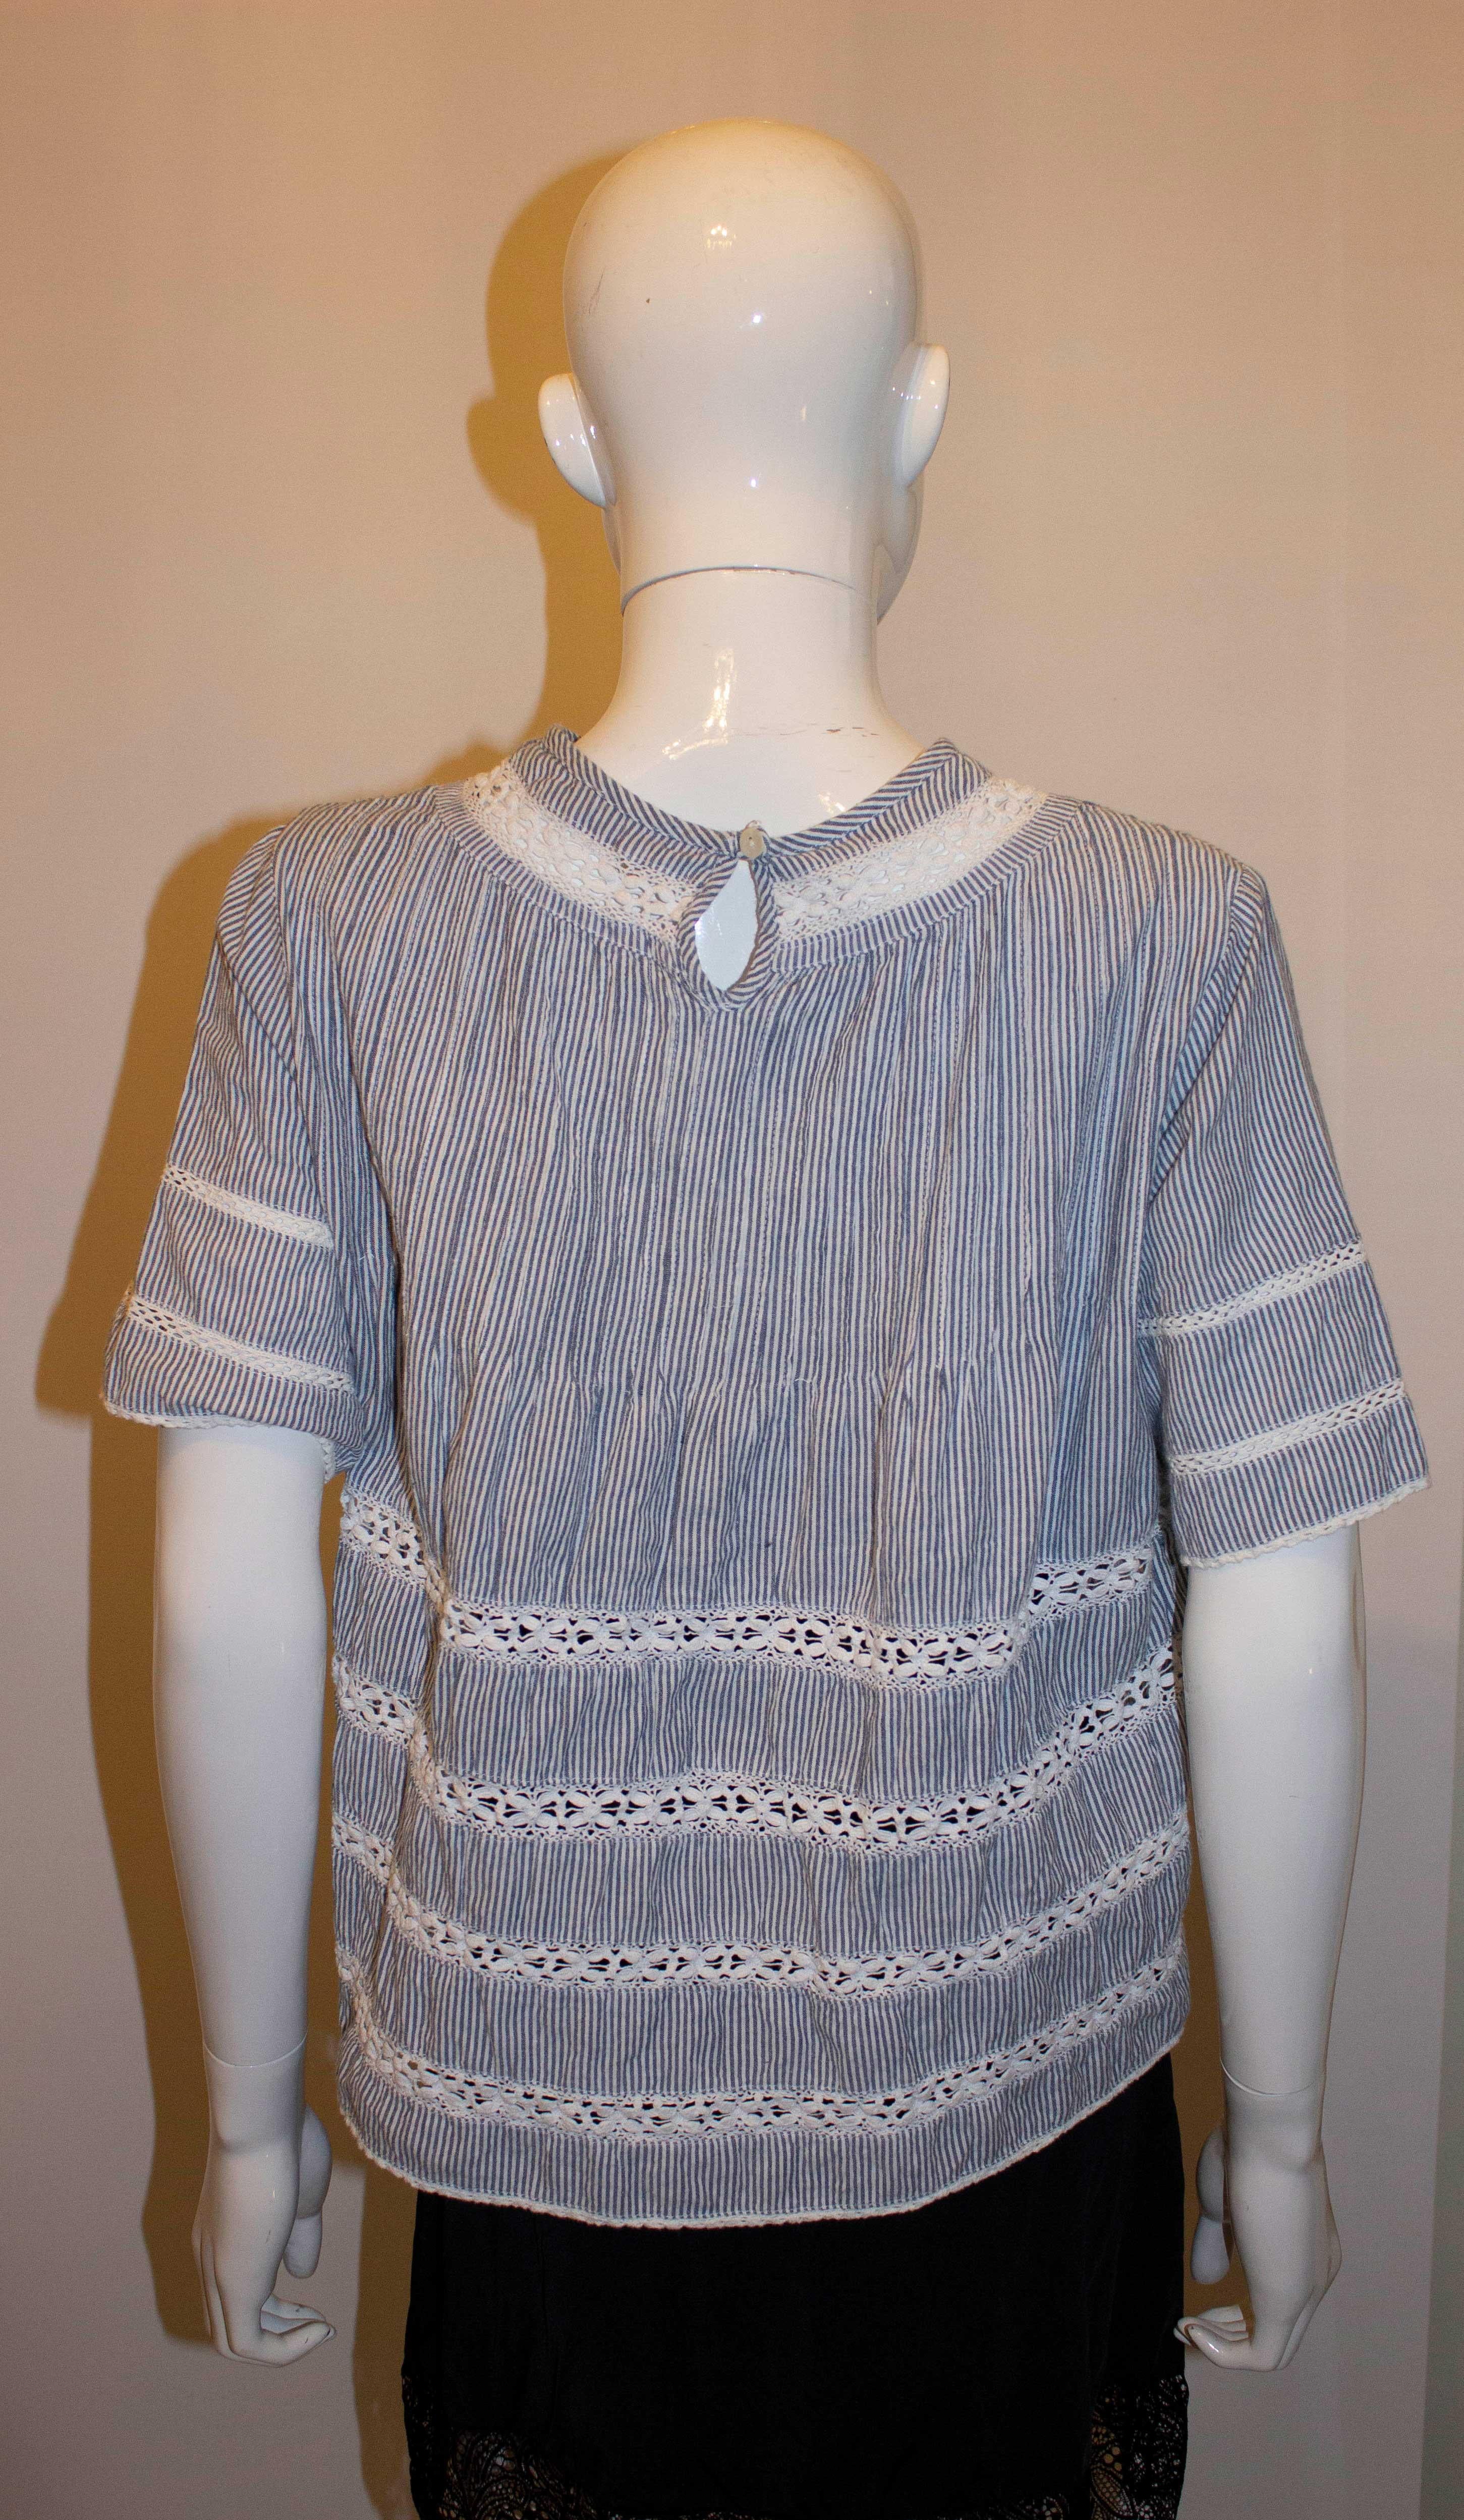 A pretty cotton top by Rose and Rose perfect for Spring / Summer days. The cotton top is in a blue and white stripe with lace detail and pintucks on the front.  It has a button opening at the back.
Size M  Bustup to 38'', length 21''